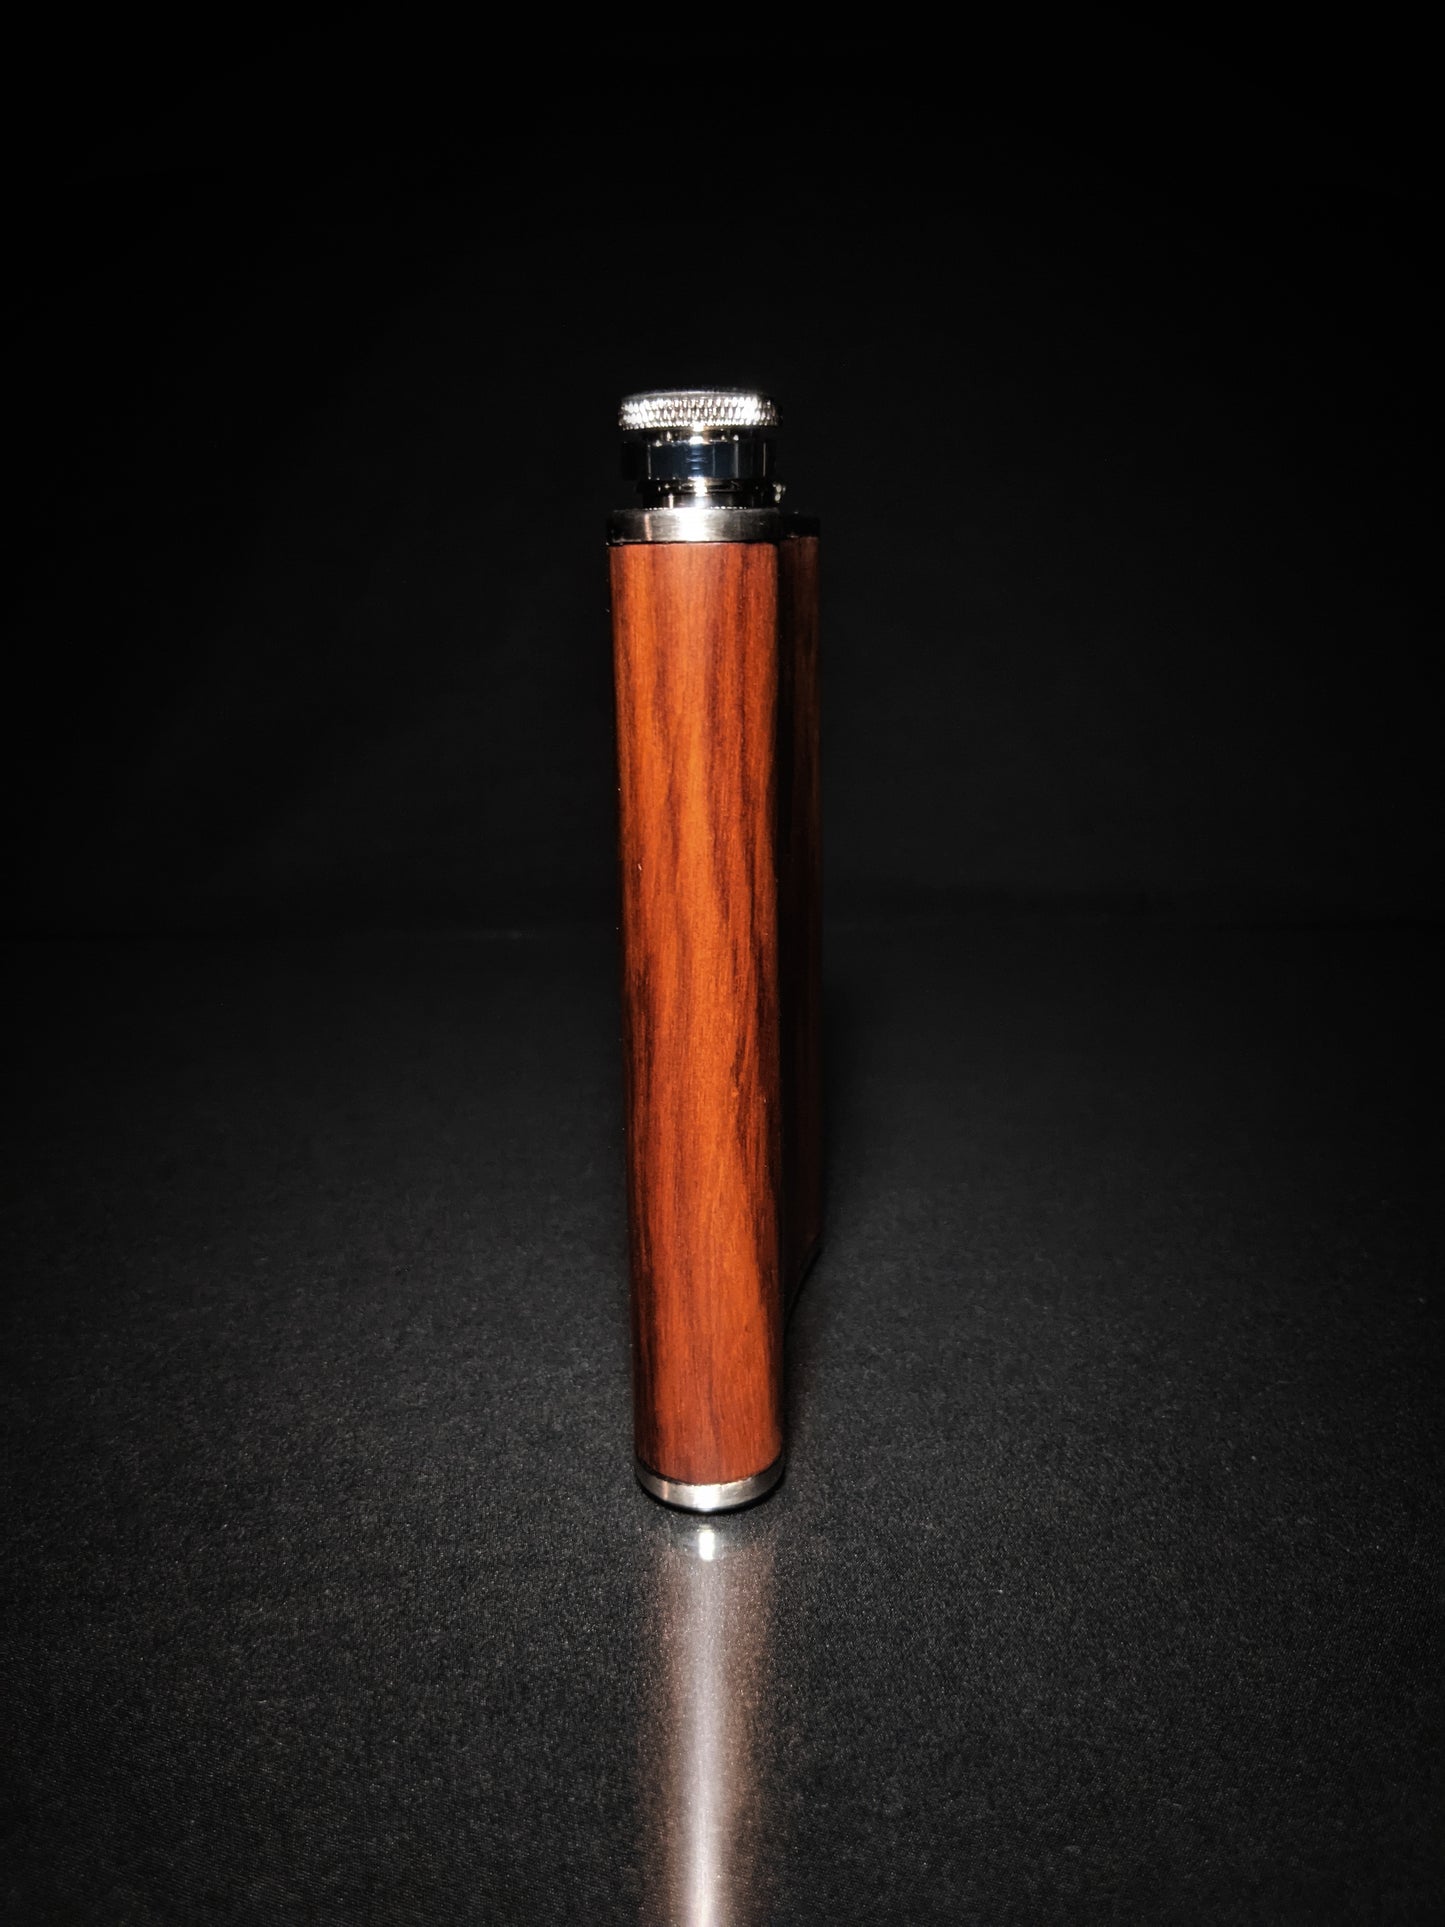 Brizard and Co. The 8 oz Flask - Rosewood